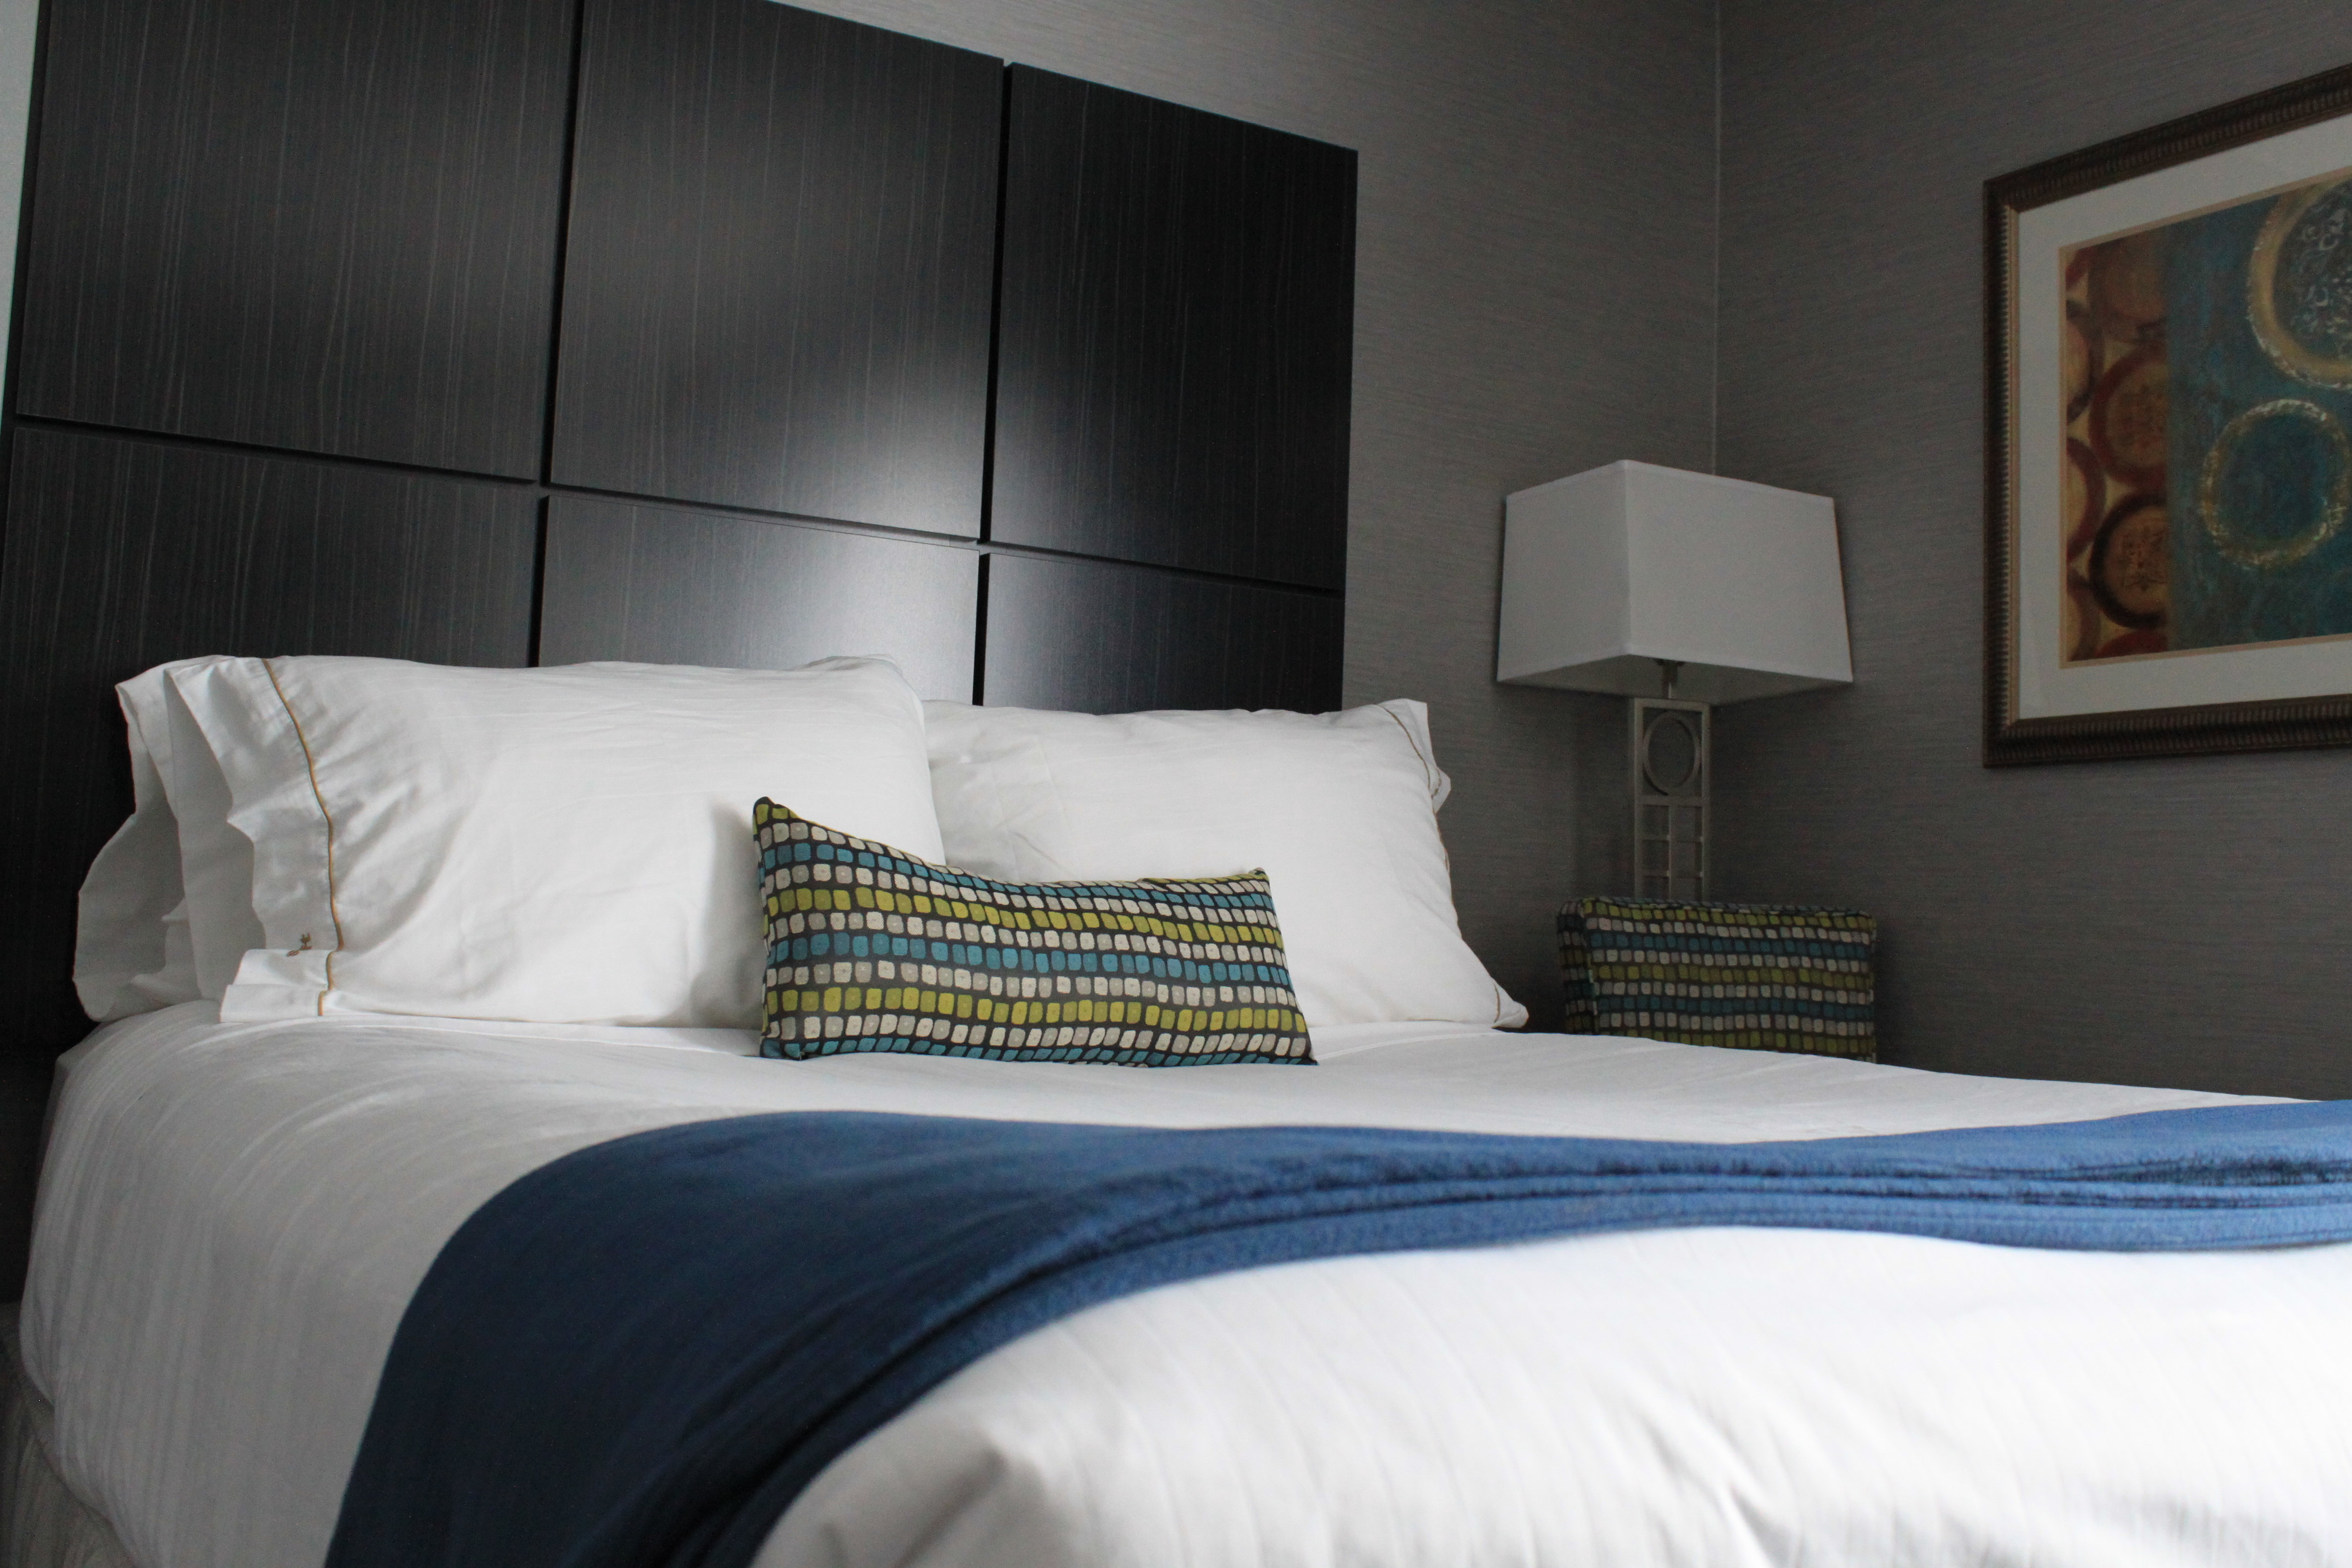 All New Rooms with our Holiday Inn Express Bedding Package